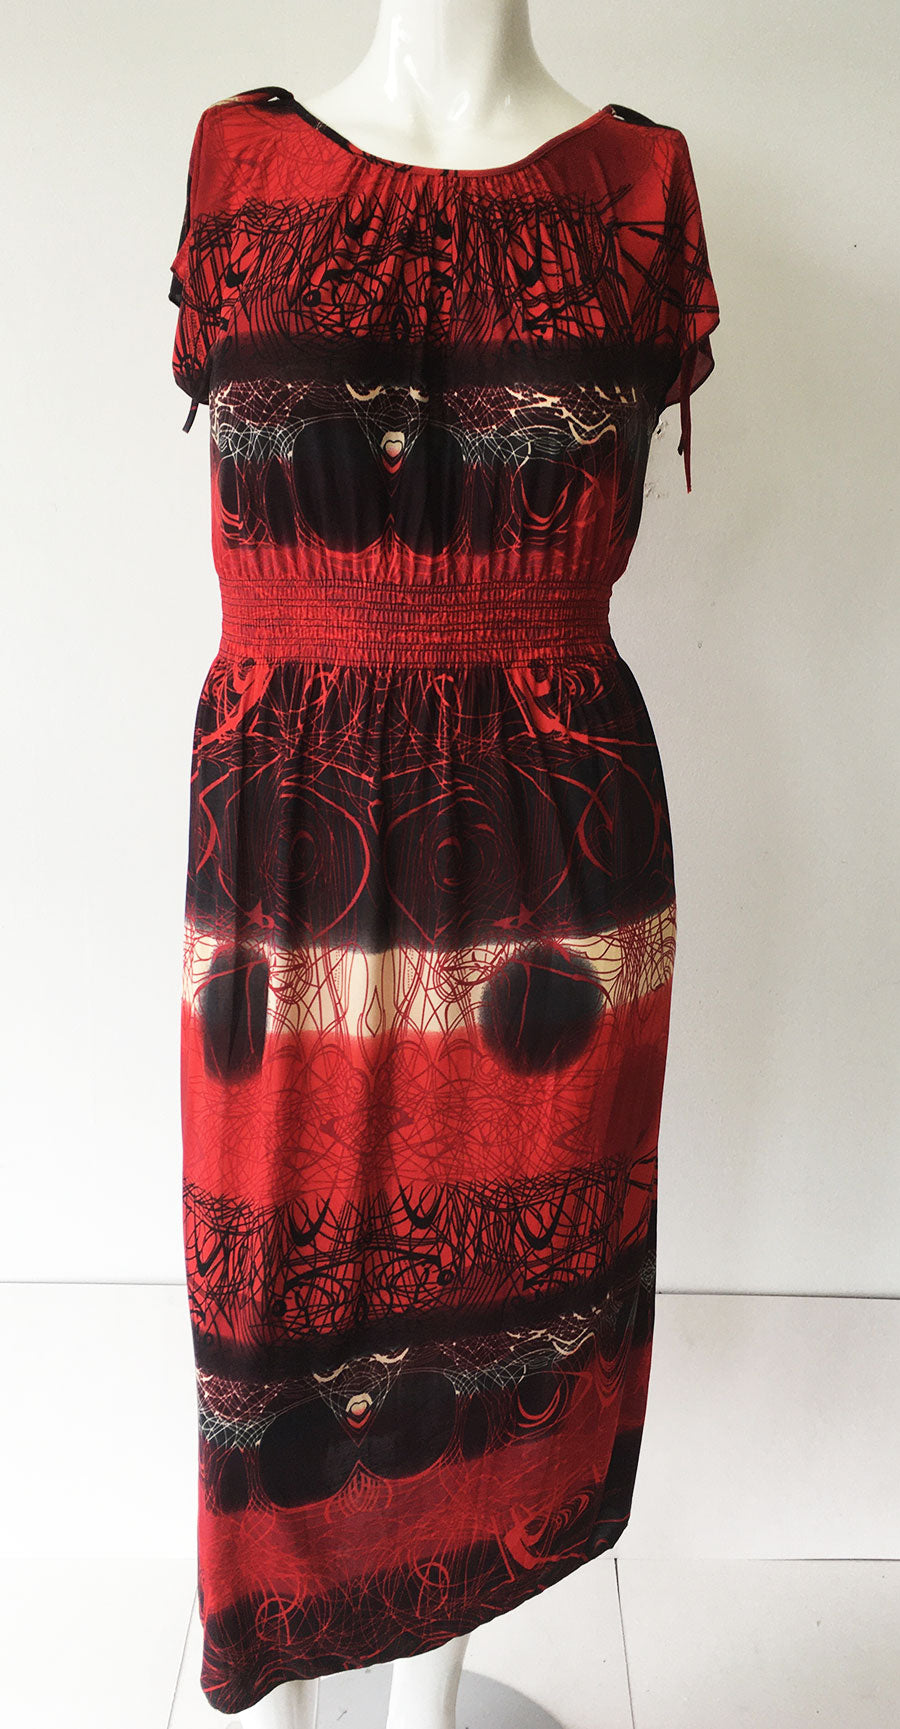 Casual Dress HY2274-Red/Black - Church Suits For Less